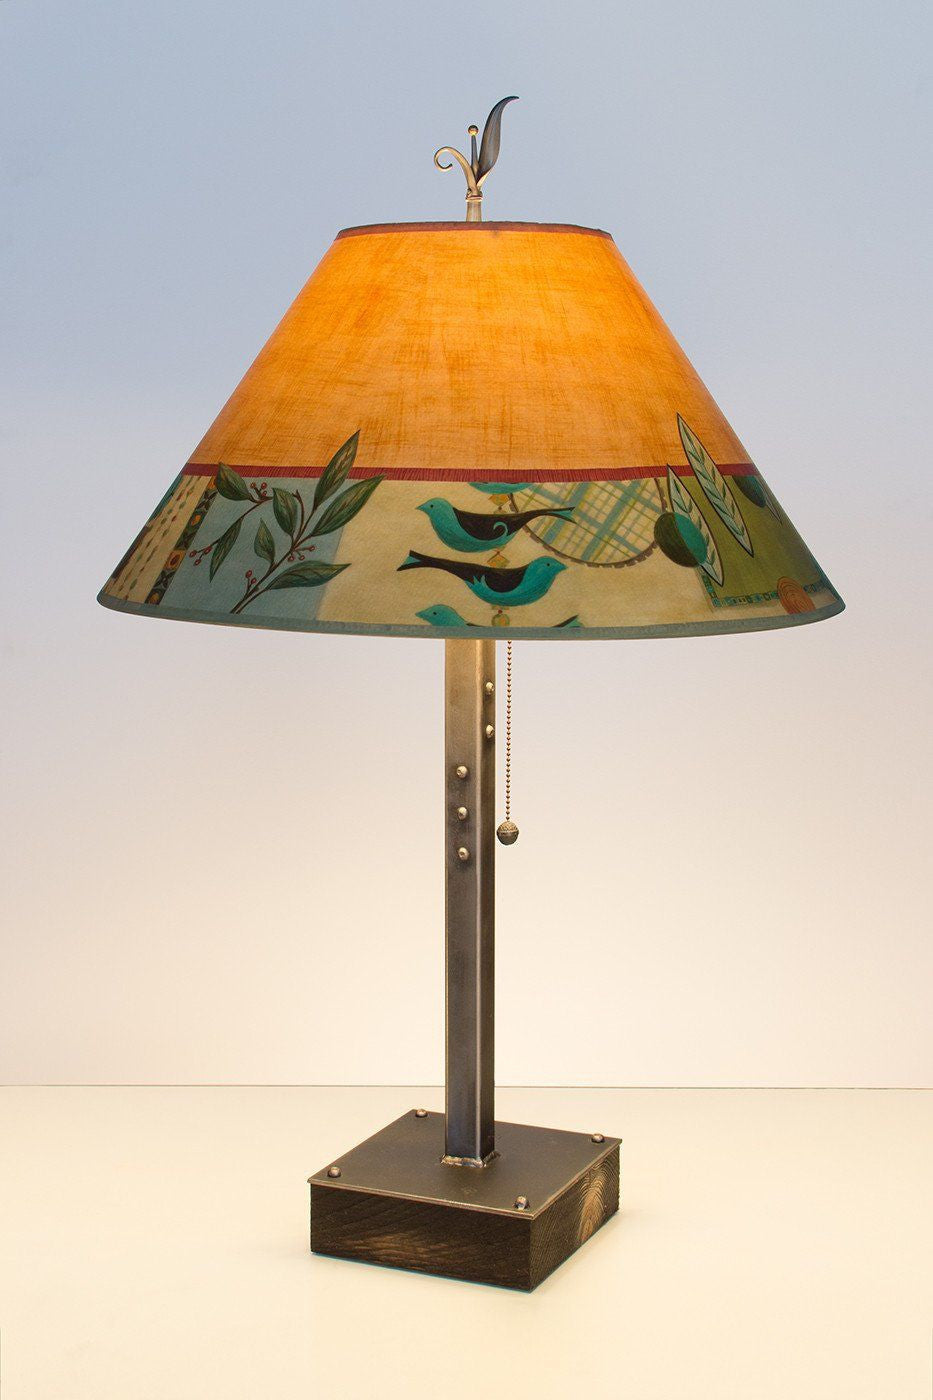 Janna Ugone & Co Table Lamps Steel Table Lamp on Wood with Large Conical Shade in New Capri Spice